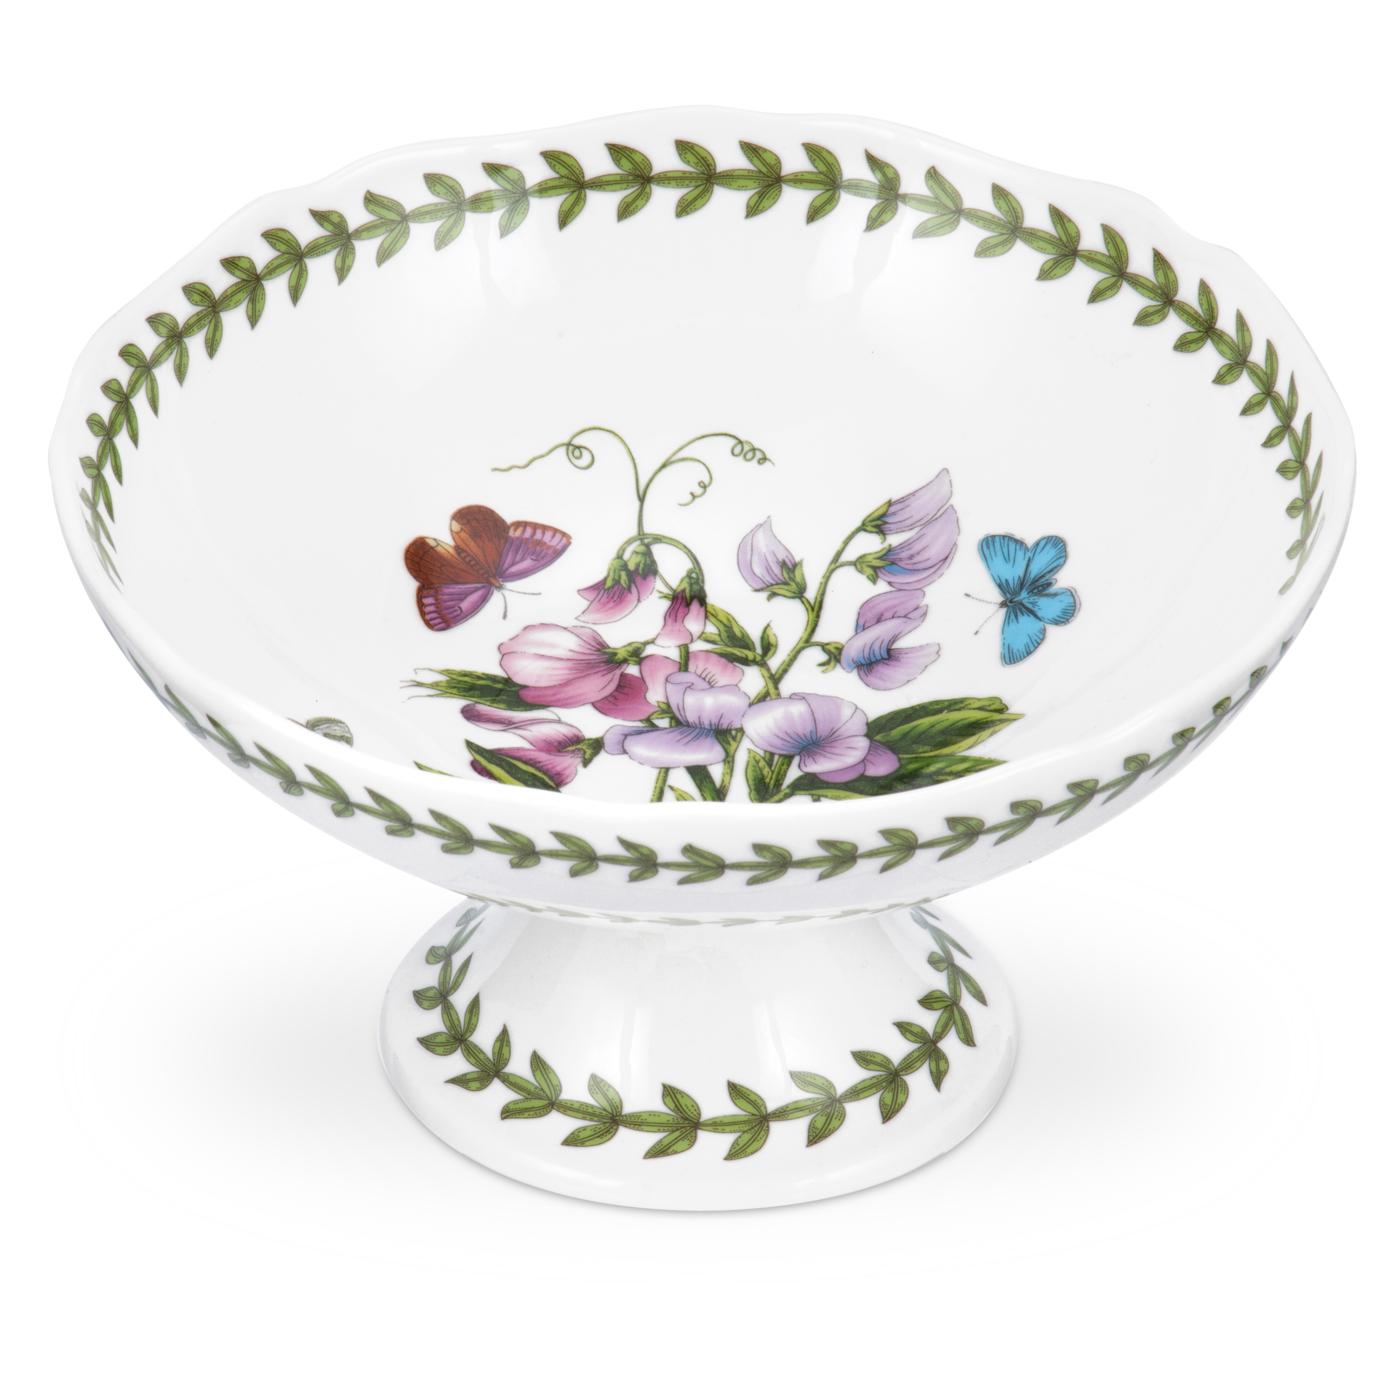 Botanic Garden 7 Inch Scalloped Edge Footed Bowl (Sweet Pea) image number null